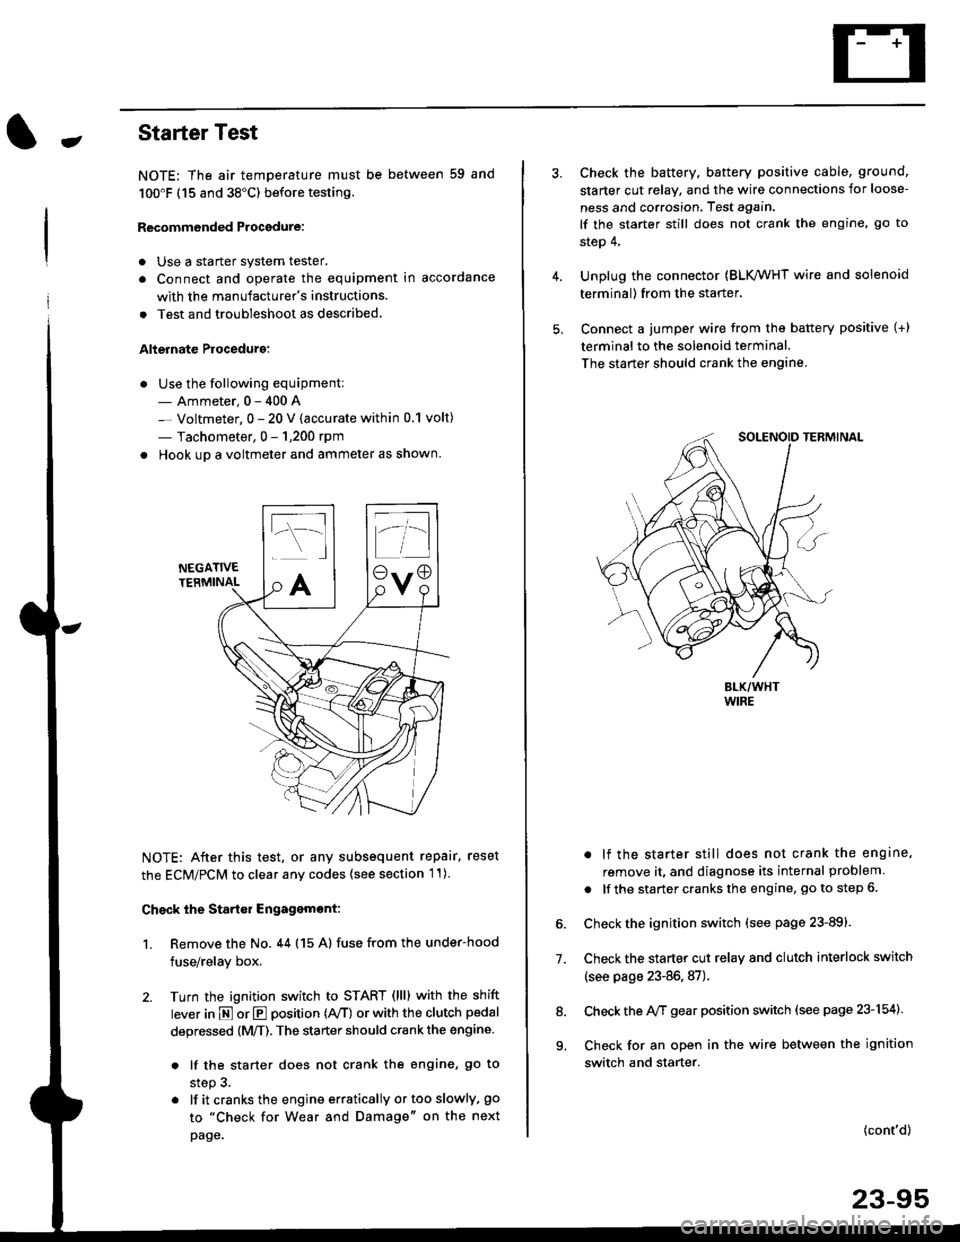 HONDA CIVIC 1996 6.G Workshop Manual -Starter Test
NOTE; The air temoerature must be between 59 and
100F (15 and 38"C) before testing.
Recommended Procedure:
. Use a staner system tester.
. Connect and operate the equipment in accordanc